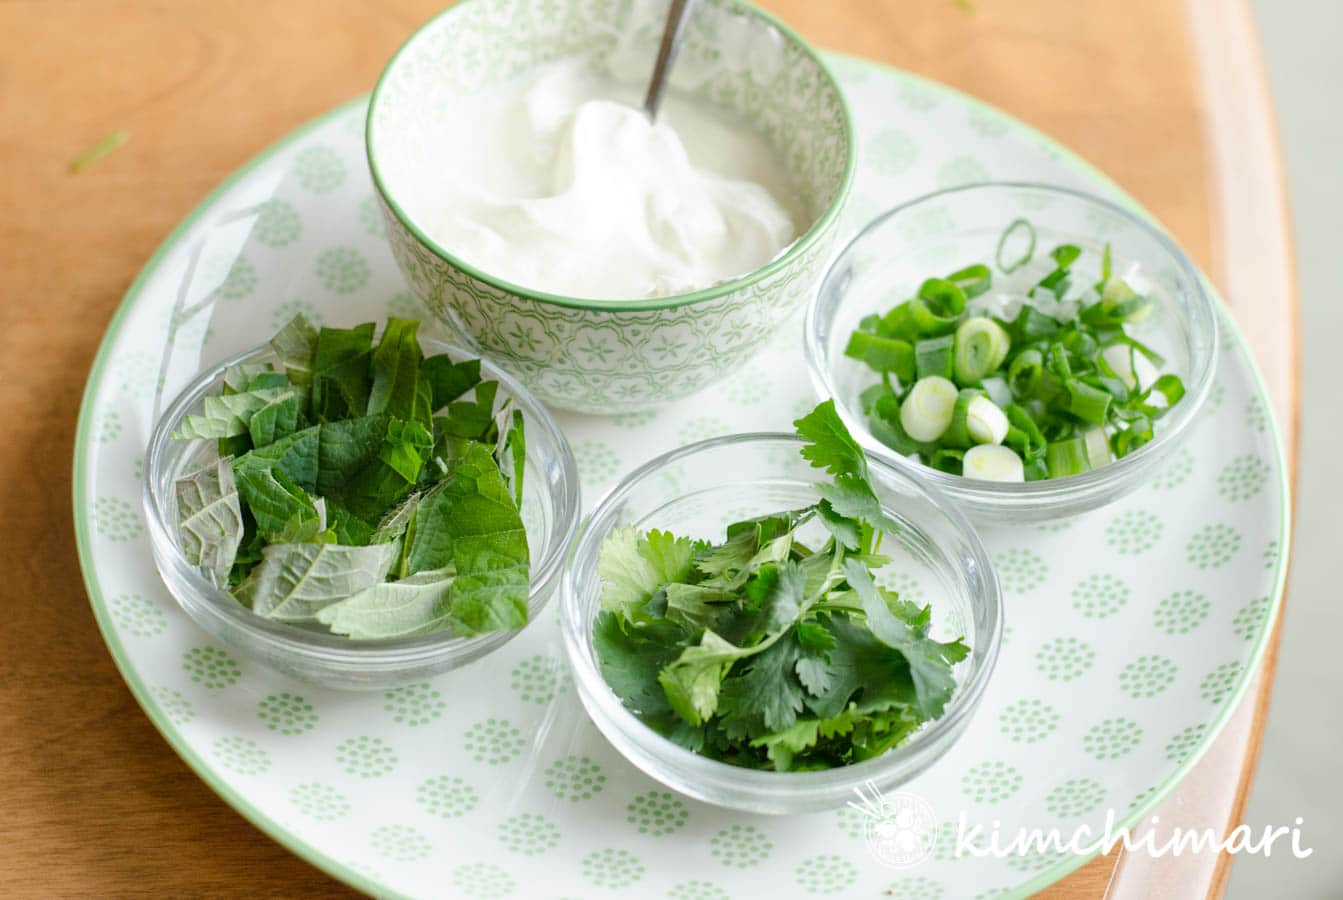 small bowls of chopped herbs and sour cream on green patterened plate